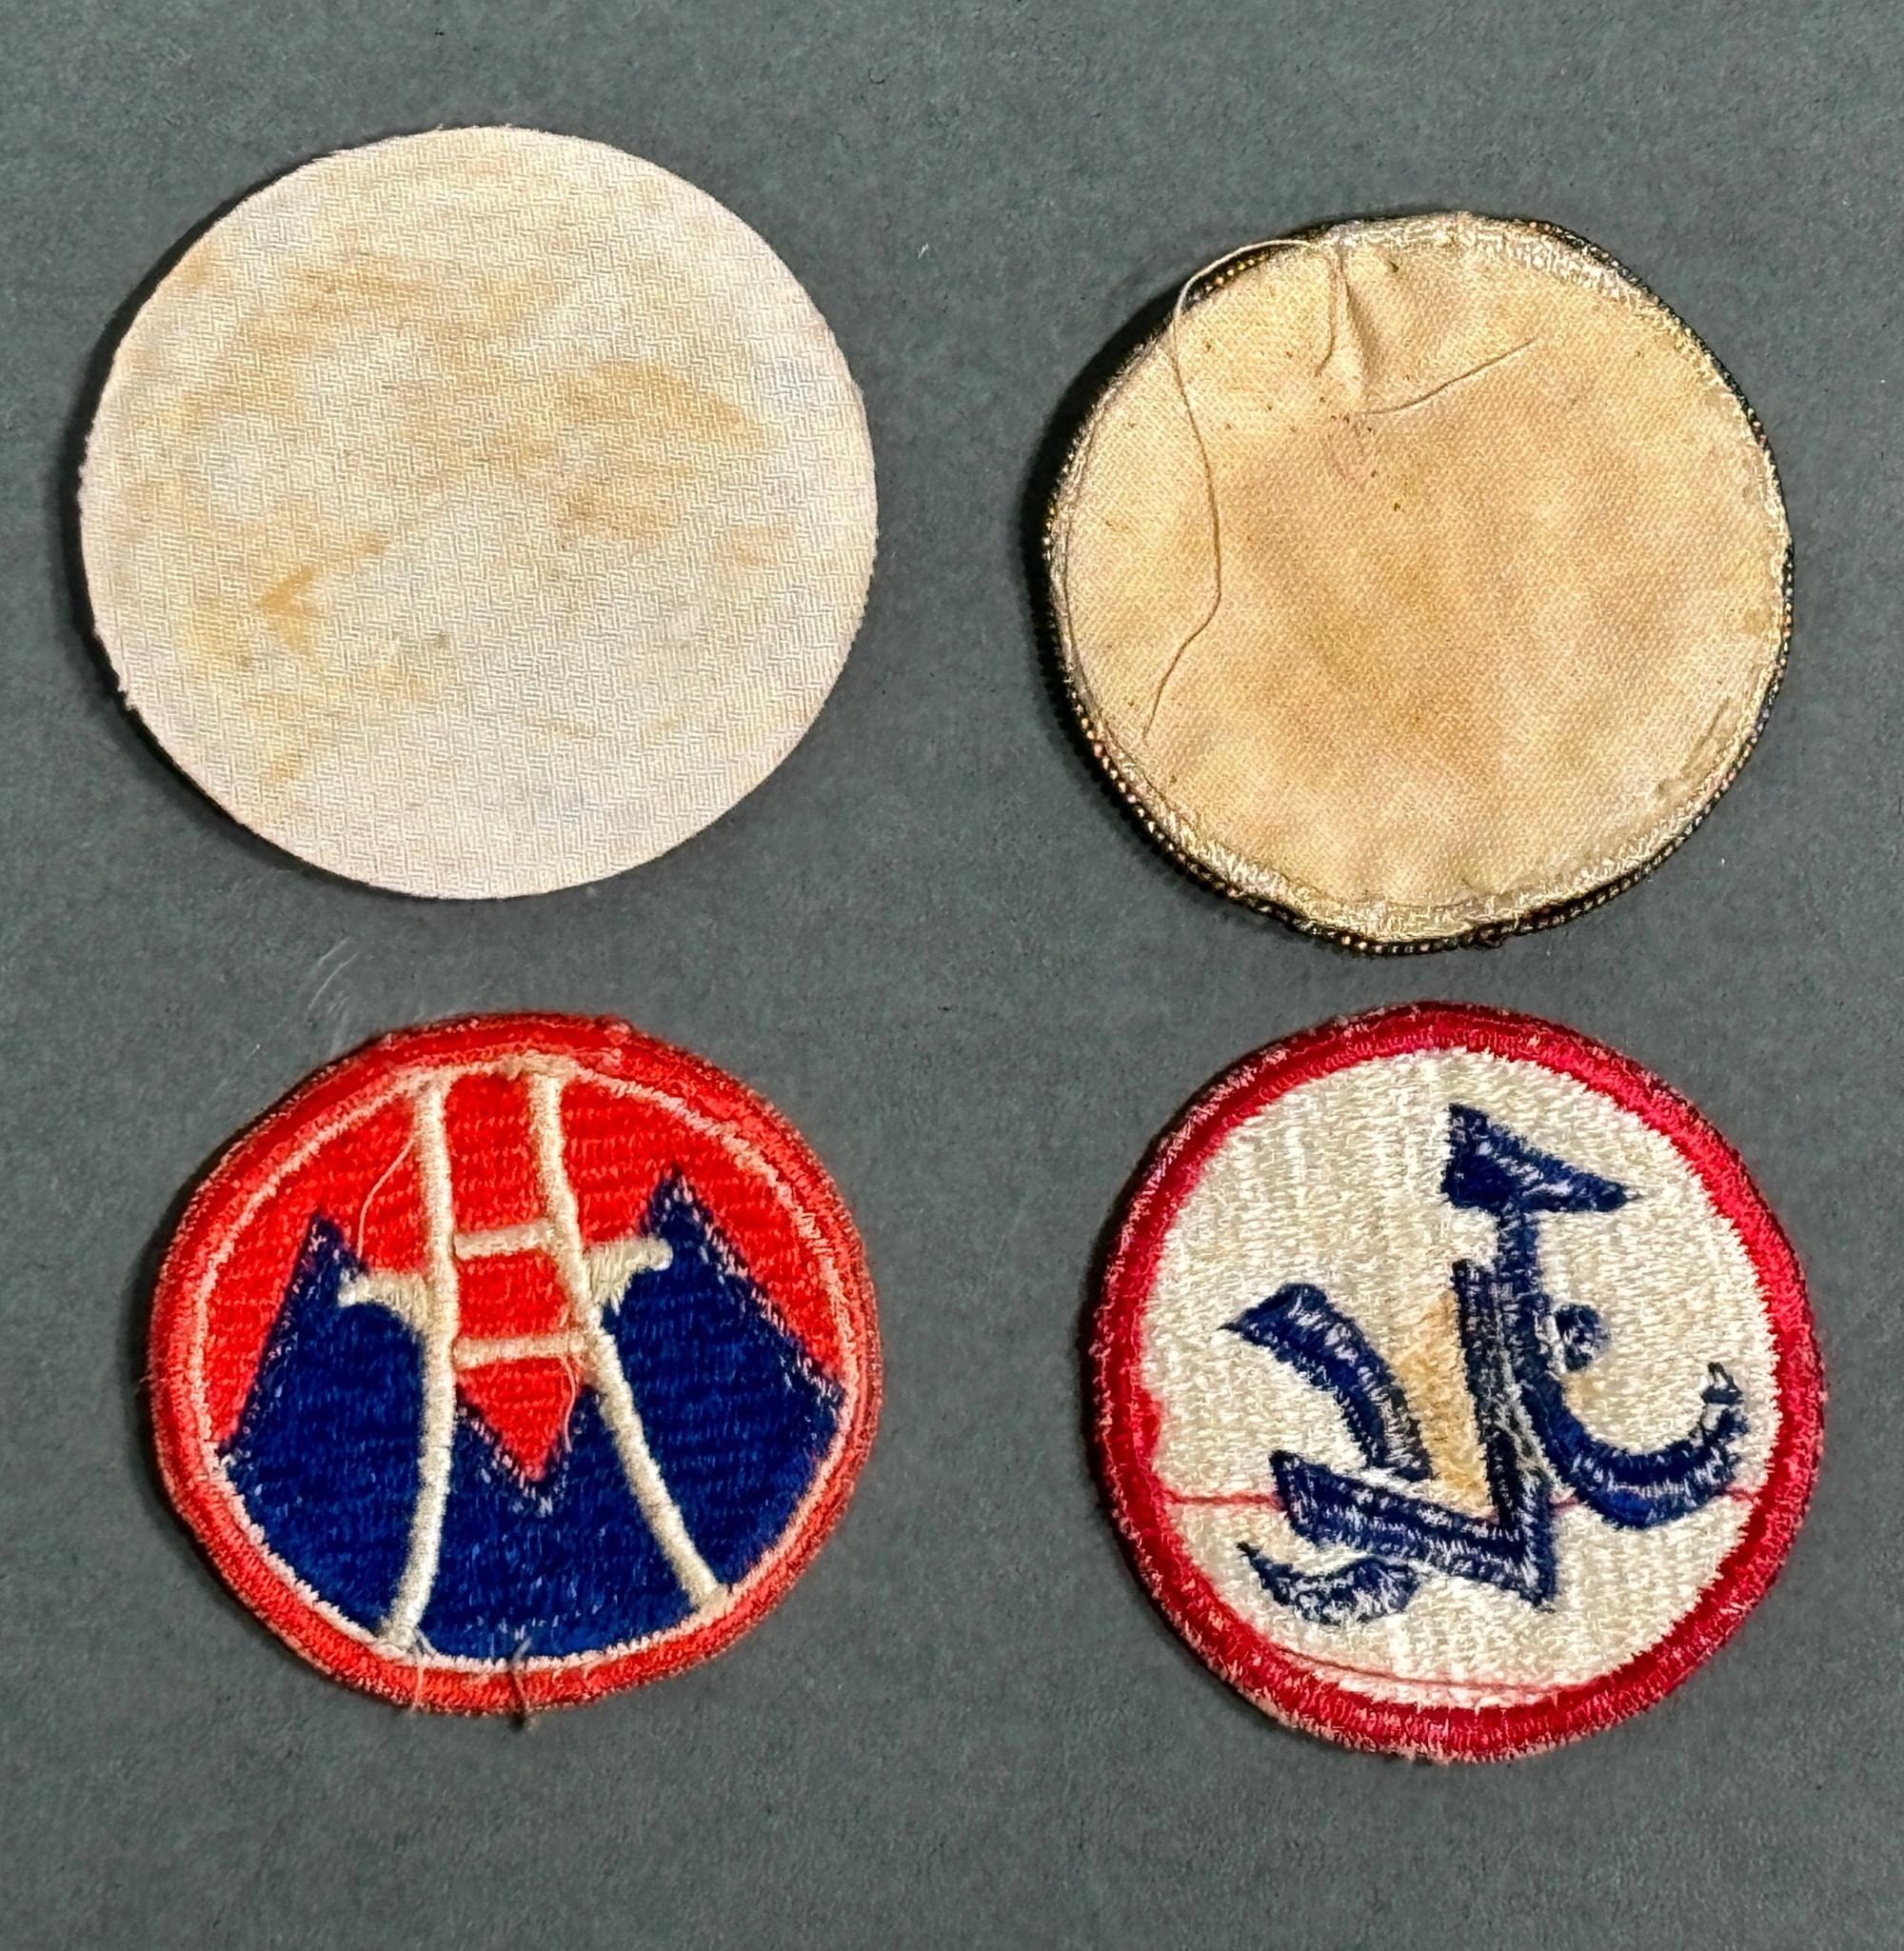 KOREAN WAR - 1990S LOGISTICS COMMAND PATCH GROUP W/ MANY THEATER MADE